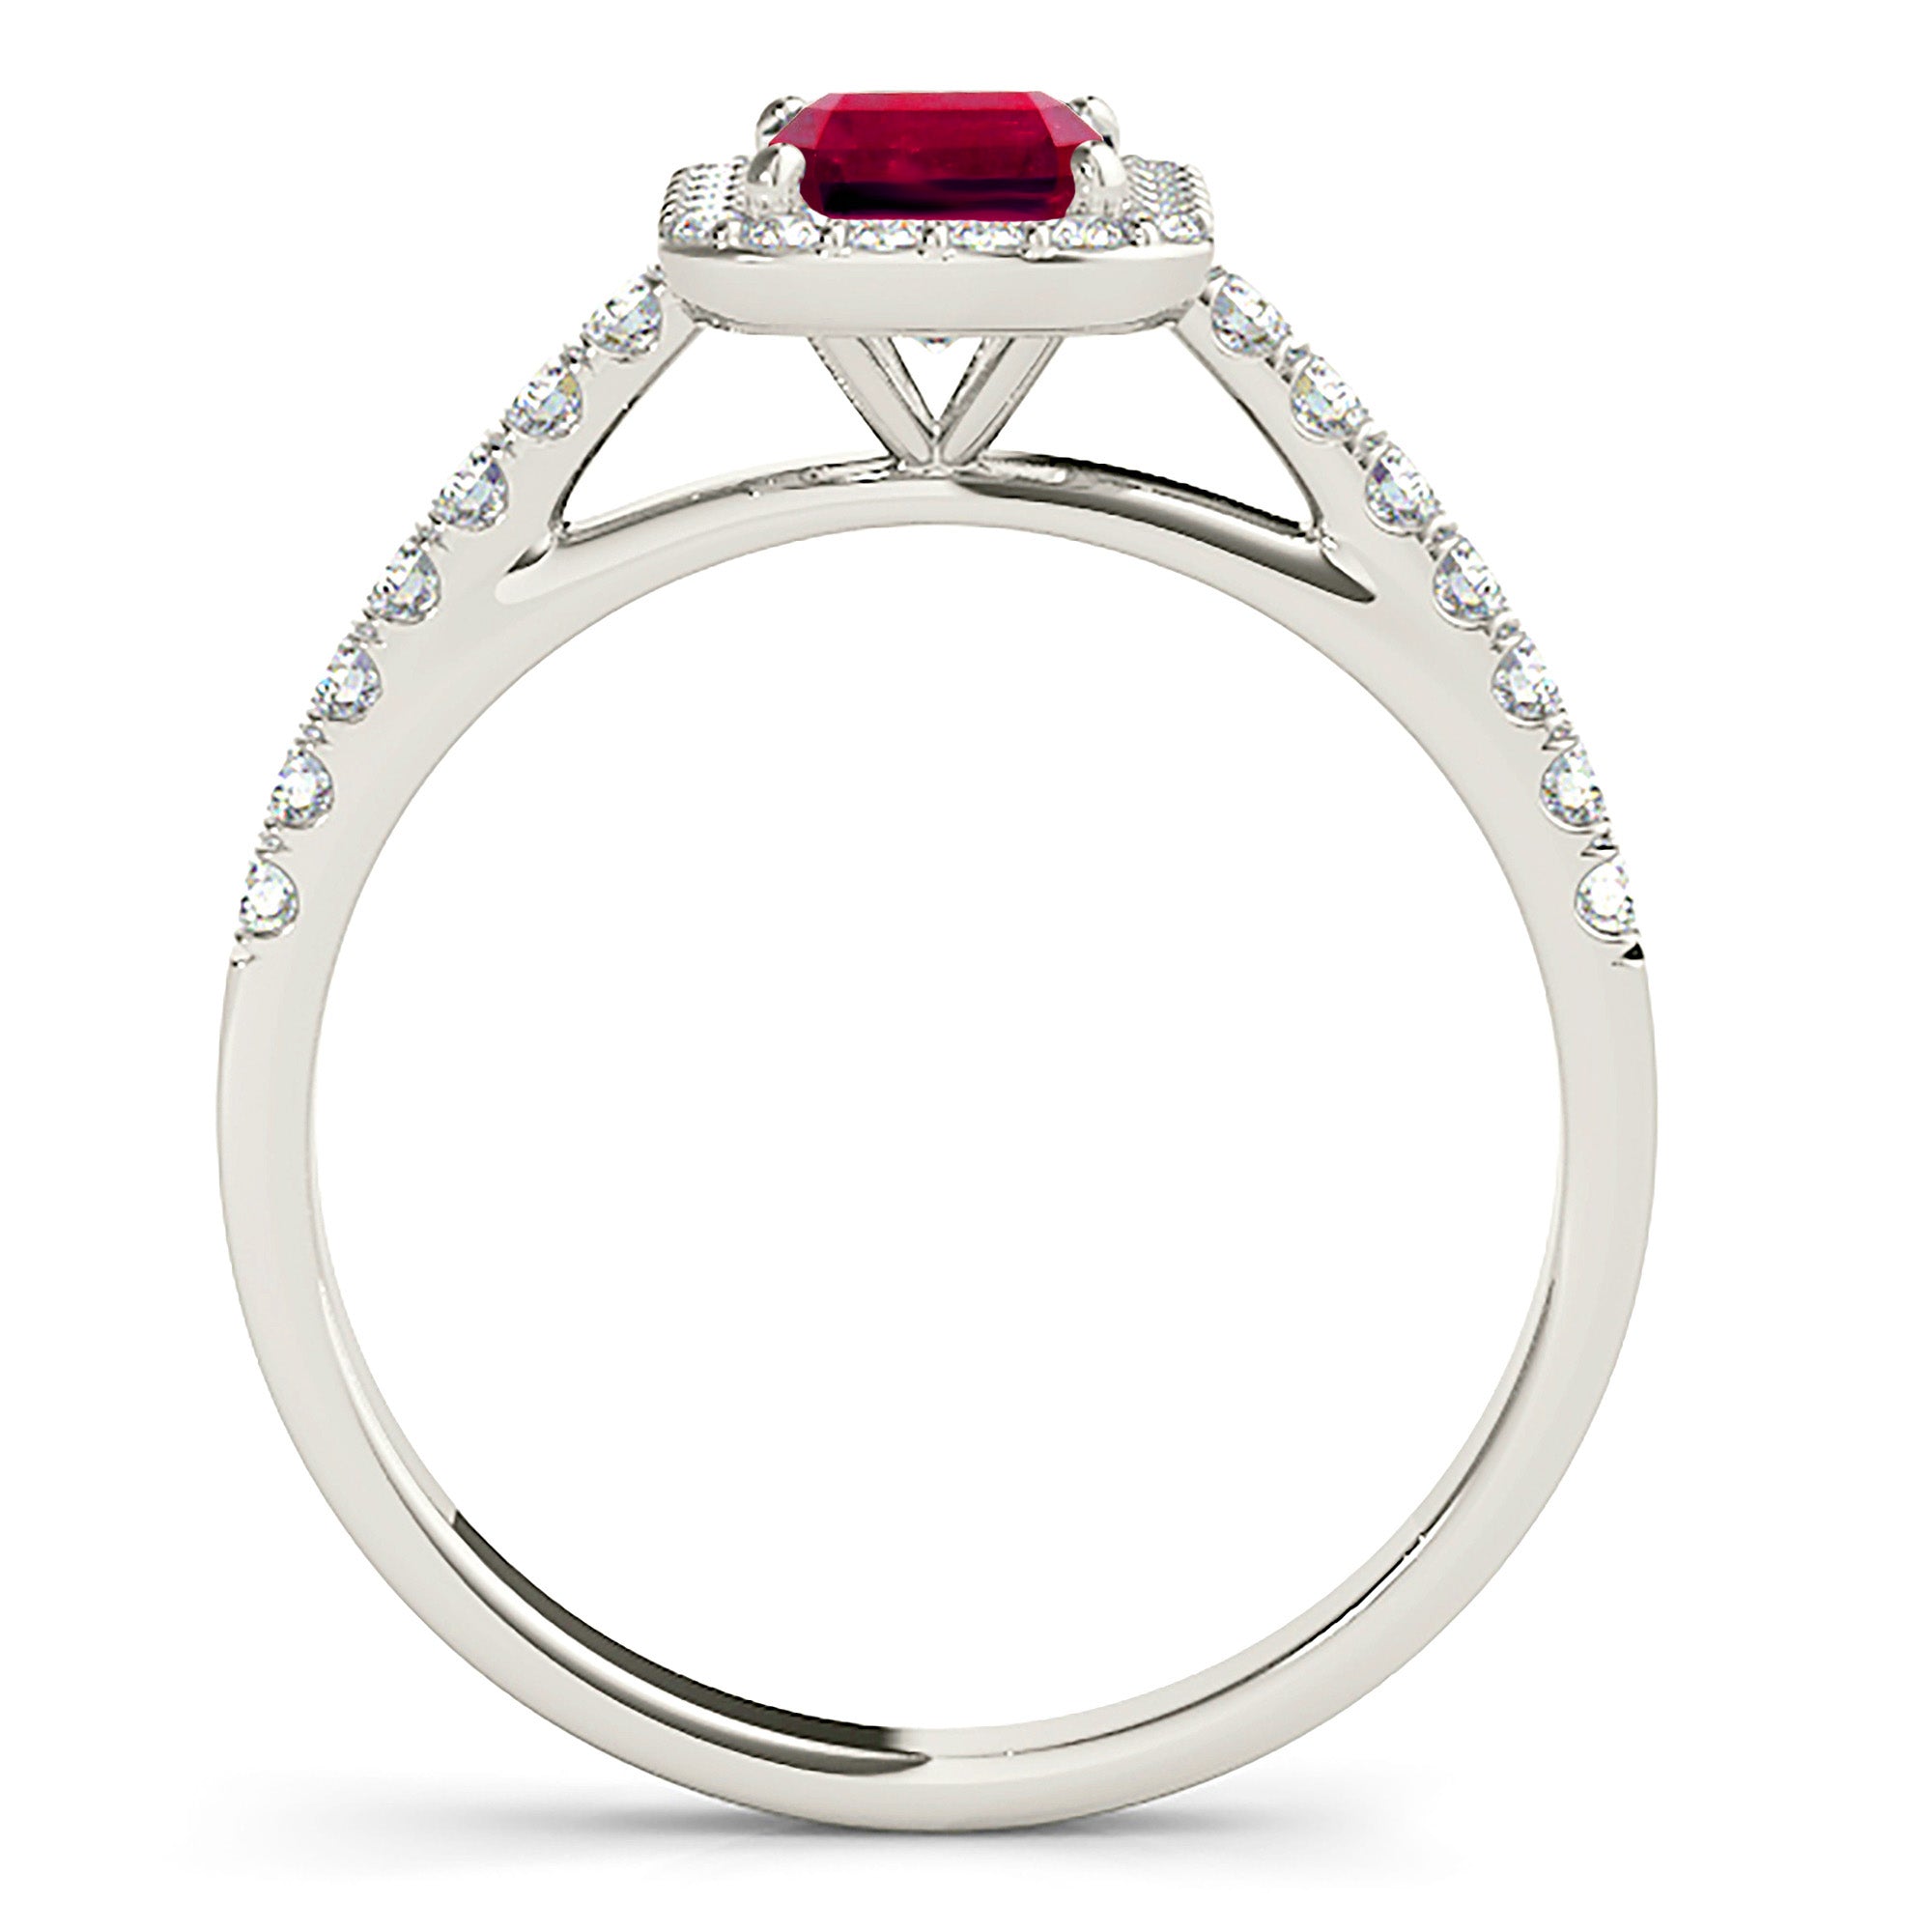 1.20 ct. Genuine Emerald Cut Ruby Ring With 0.25 ctw. Diamond Halo And Delicate Diamond Band-in 14K/18K White, Yellow, Rose Gold and Platinum - Christmas Jewelry Gift -VIRABYANI